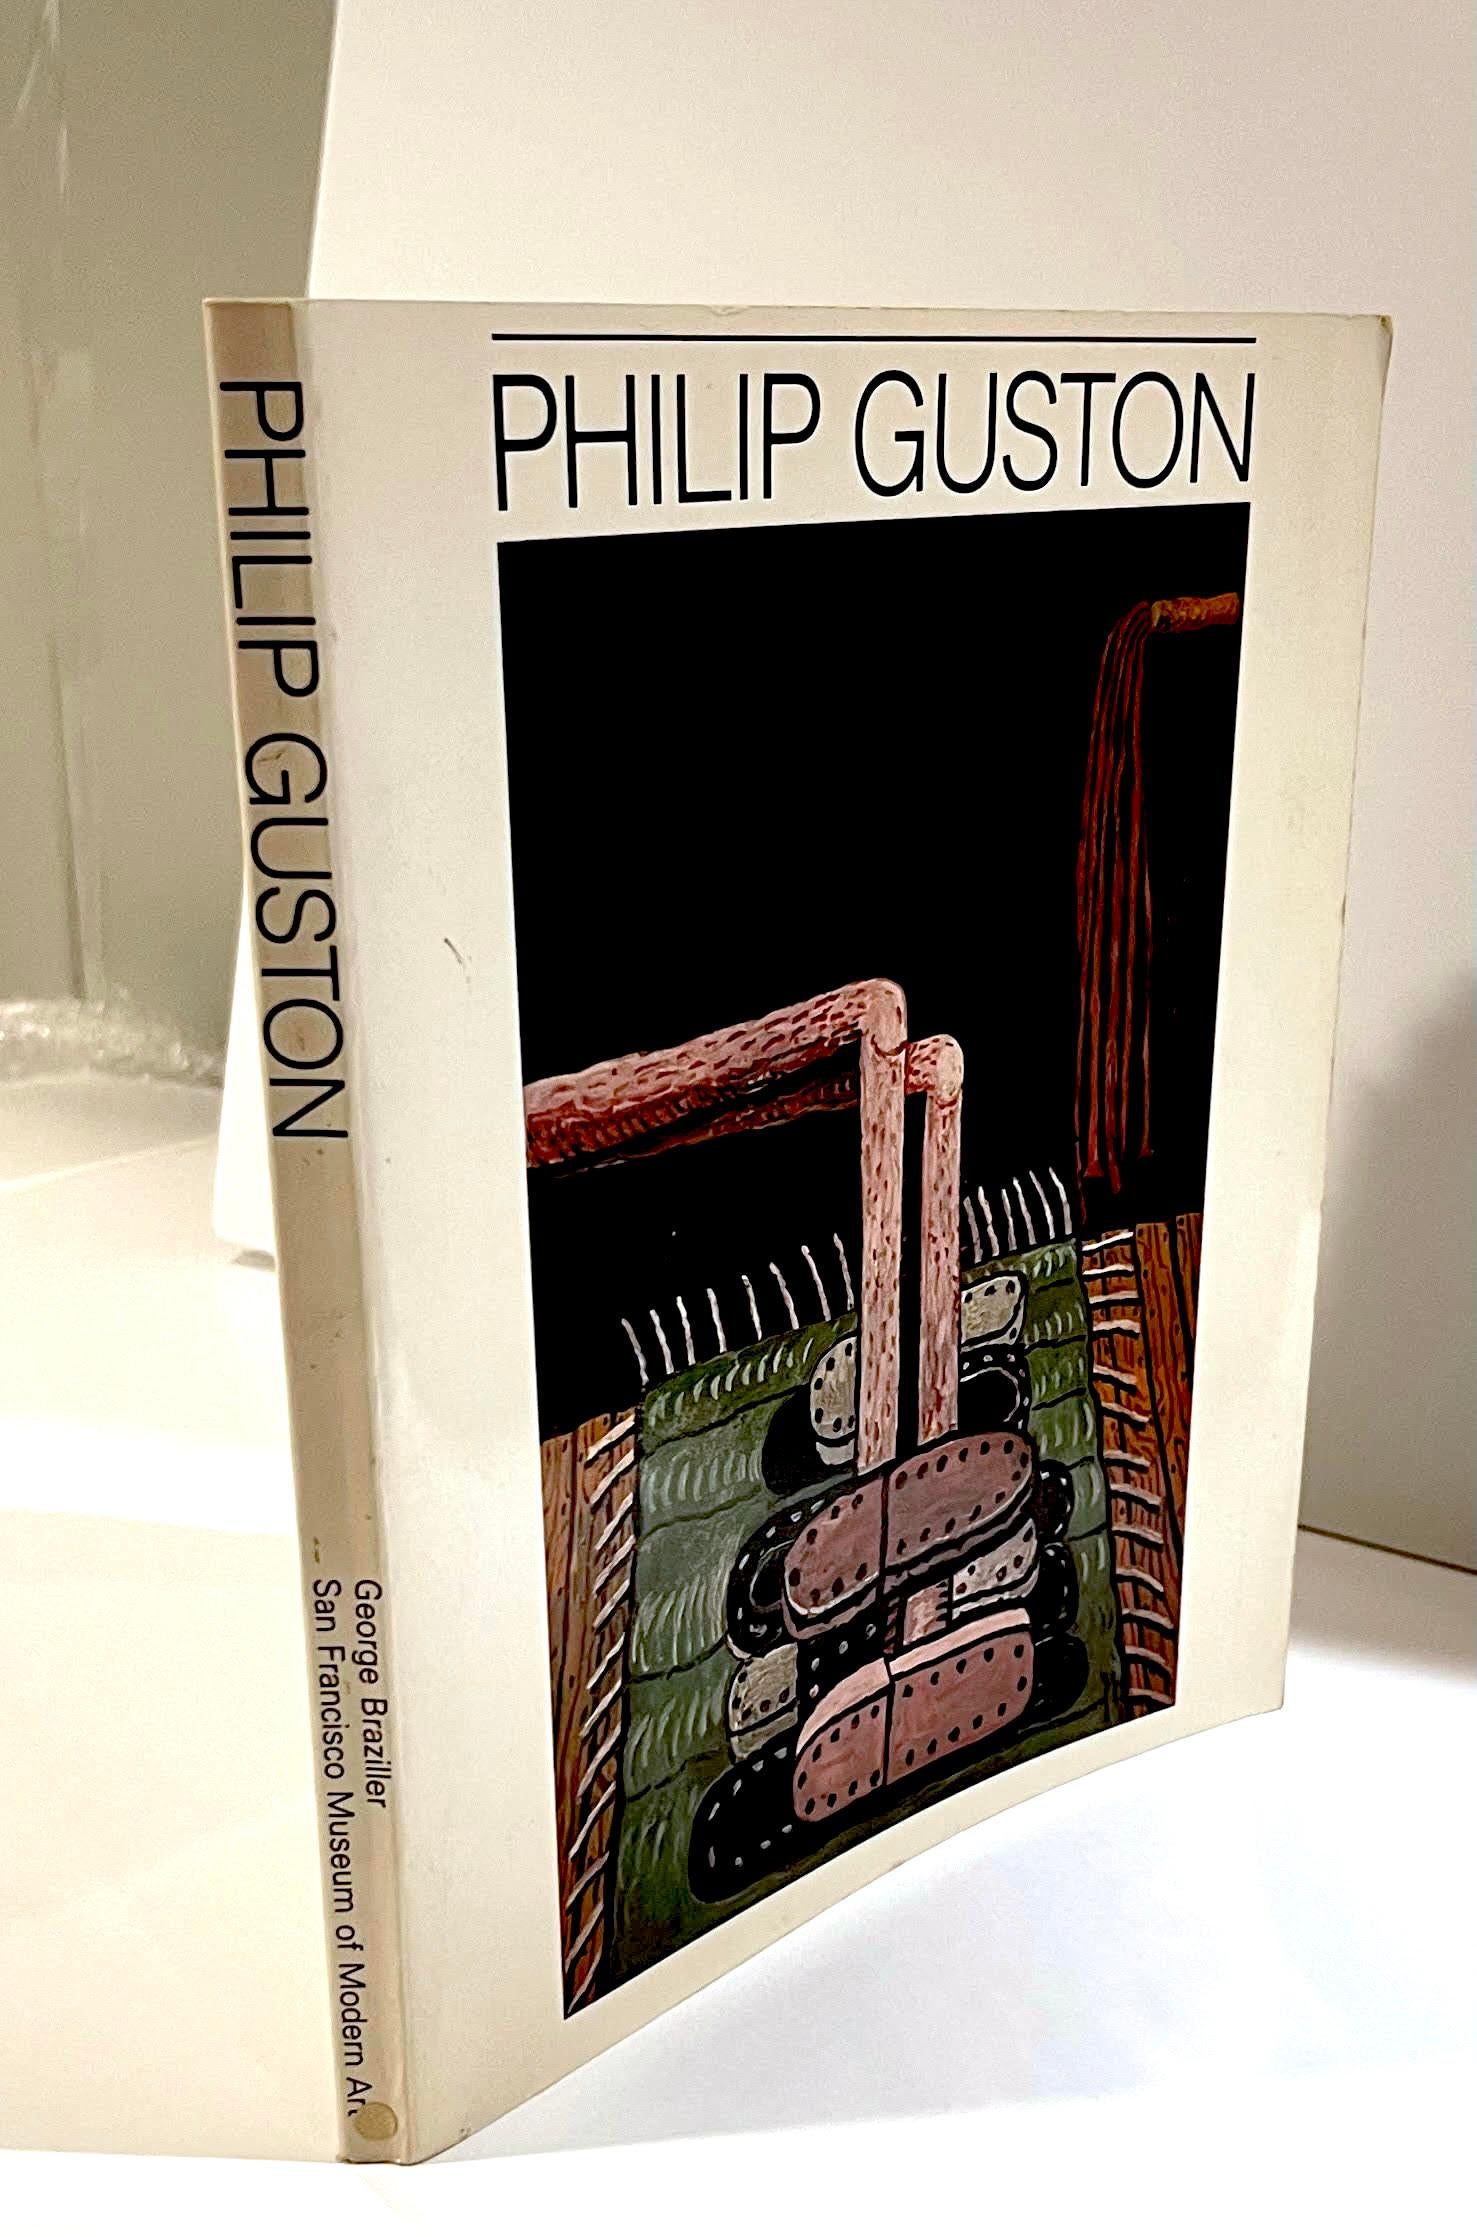 Philip Guston
Monograph: Philip Guston (Hand signed and inscribed to major collector by Philip Guston), 1980
Softback monograph (hand signed, inscribed and dated by Philip Guston to Mary Keesling)
Warmly signed and inscribed by Philip Guston to Mary